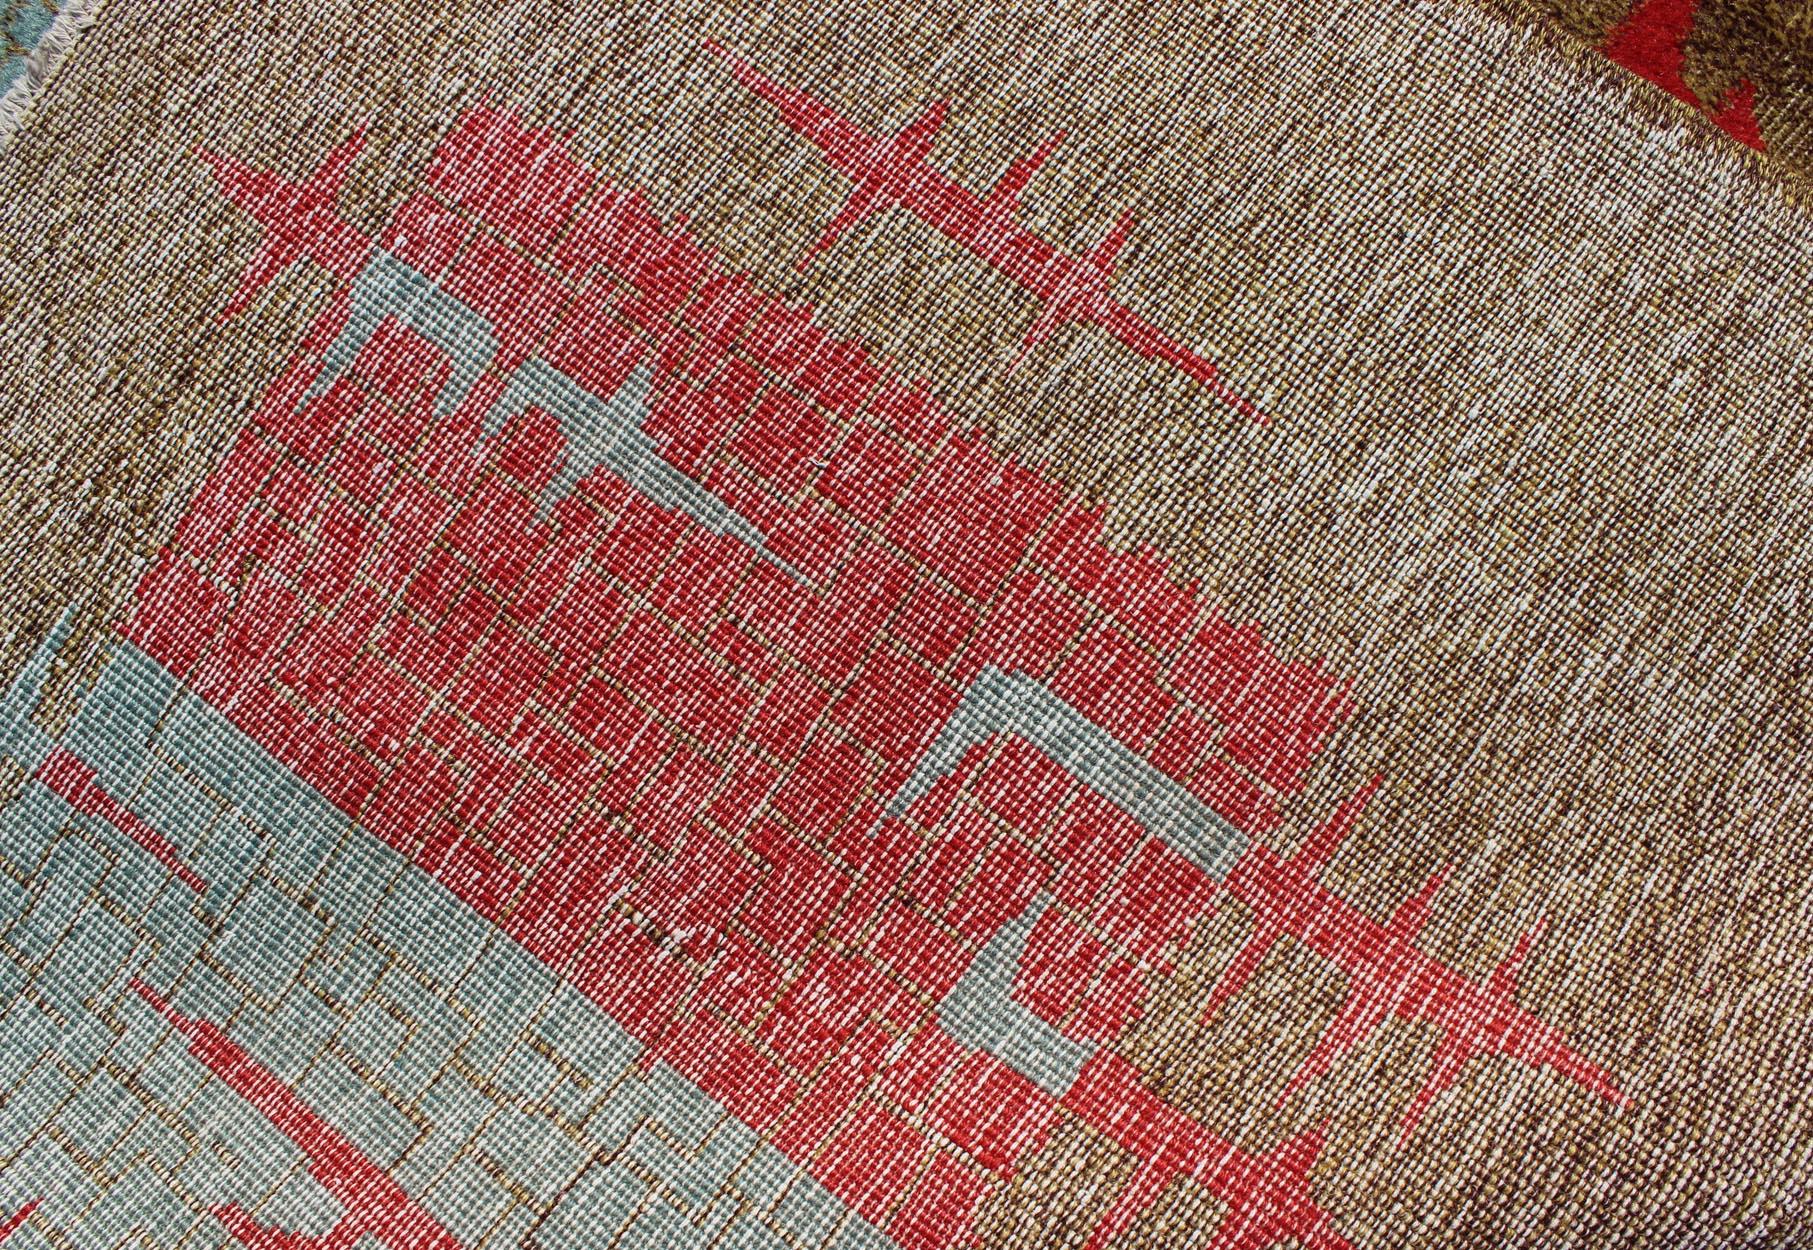 Mid-Century Modern Turkish Rug with Teal-Blue and Red Geometric Shapes  For Sale 3